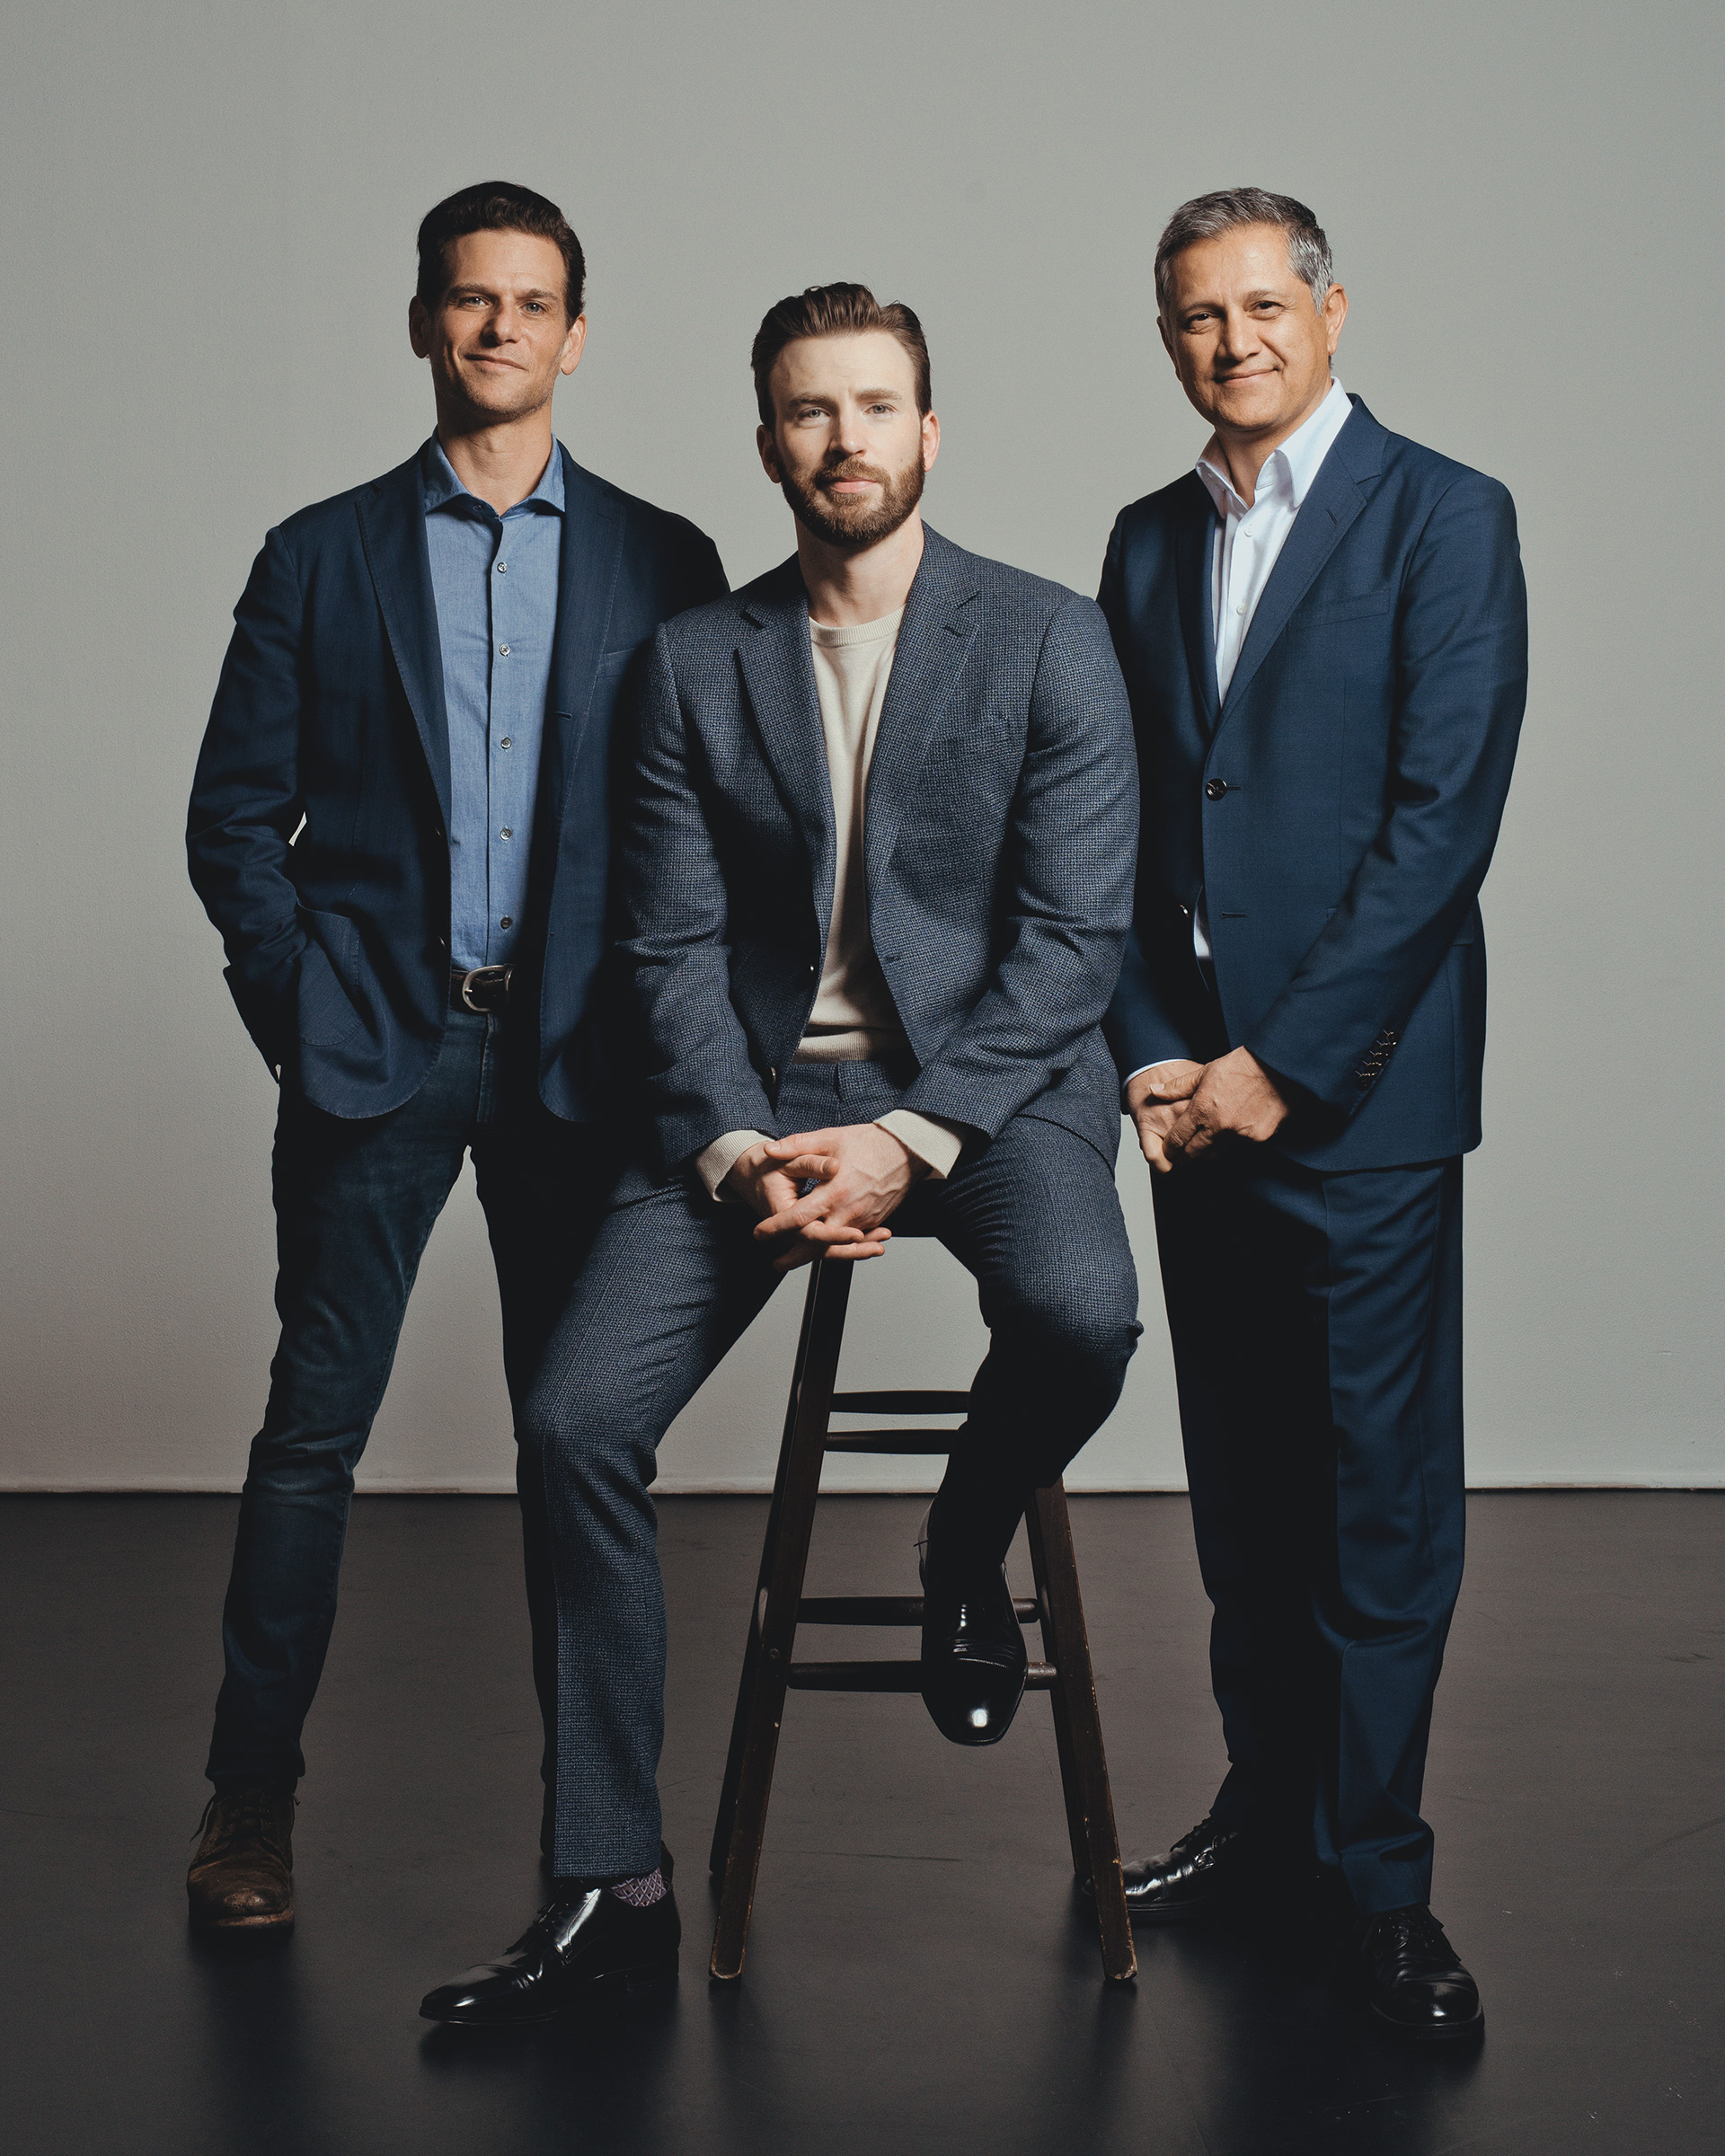 Mark Kassen, Chris Evans and Joe Kiani photographed in Los Angeles, CA on March 11, 2020. (Ryan Pfluger for TIME)